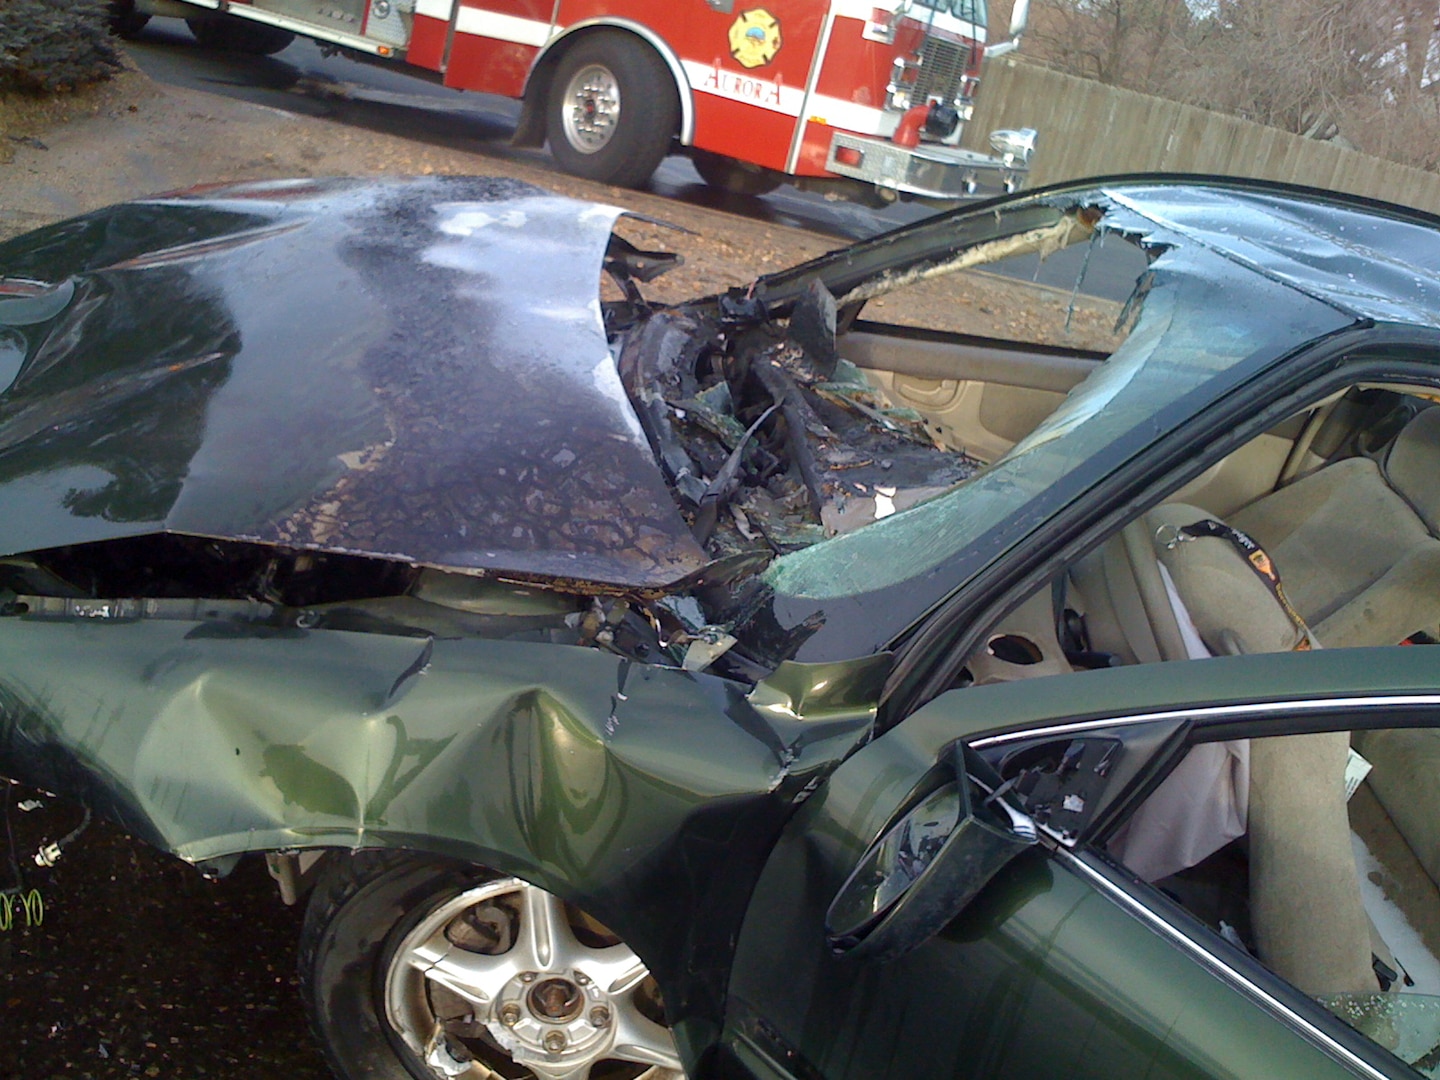 Remains of a green sedan following a fiery, one-car crash on Airport Road in Aurora, Colo., March 6, 2011. Seven Soldiers and Airmen rescued two victims from the burning car. The group was composed of Colorado National Guardmembers and Army Reservists who were on their way to drill that morning.